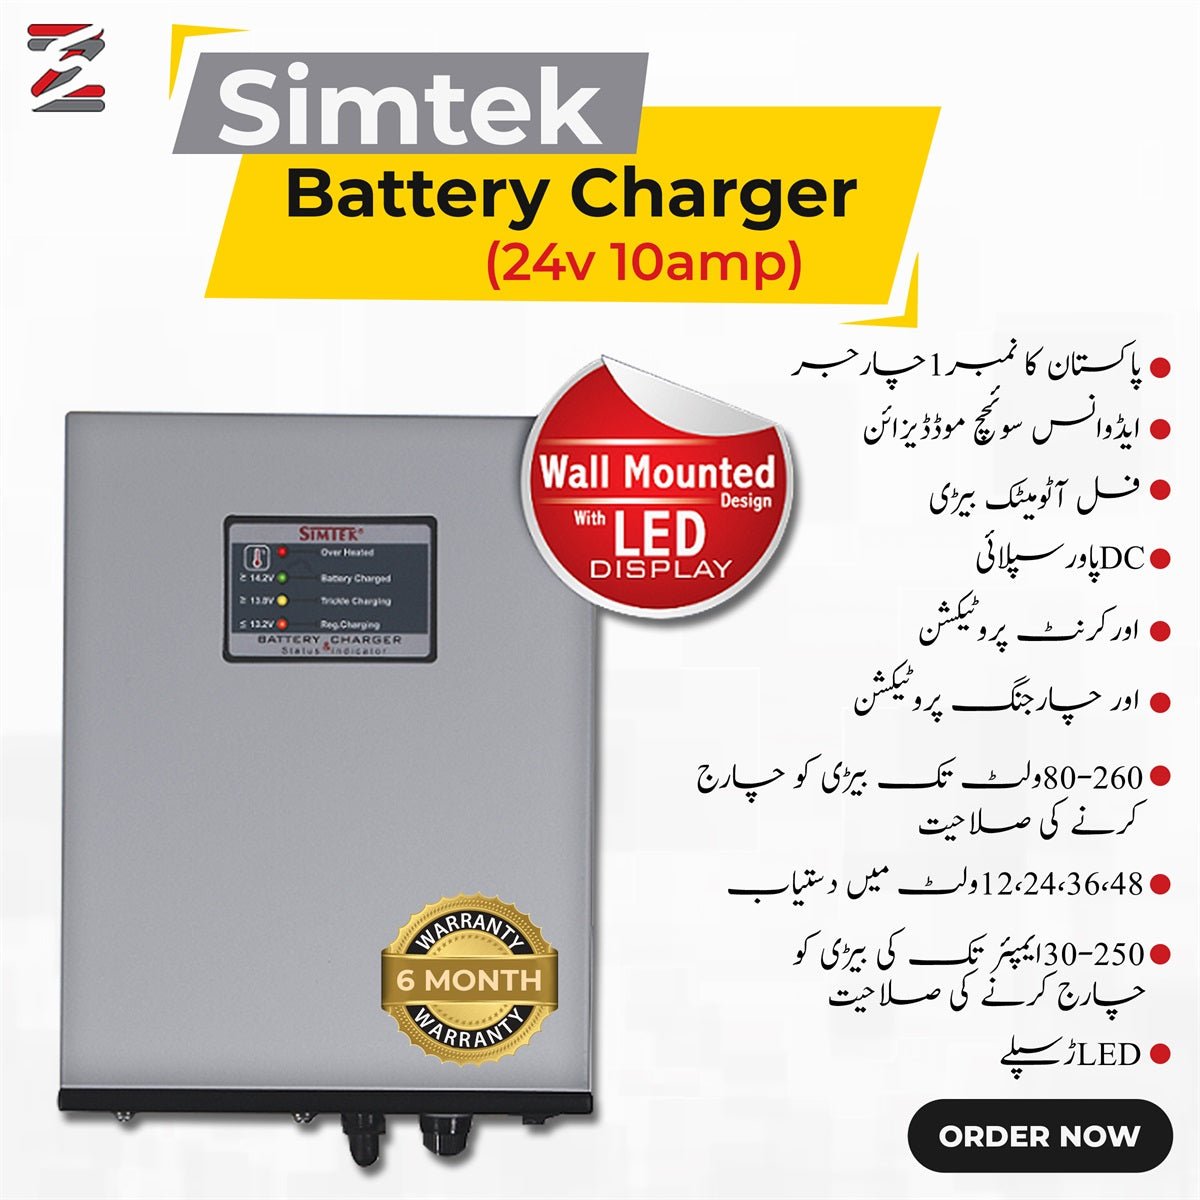 Simtek Battery Charger 24V 10AMPBuy Simtek Best Battery Charger in Pakistan, Hyderabad, Karachi. We Provide Online at the best price with online Technical Support. Repairable &amp; with a Warranty Simtek Battery Charger 24V 10AMPZam Zam Store